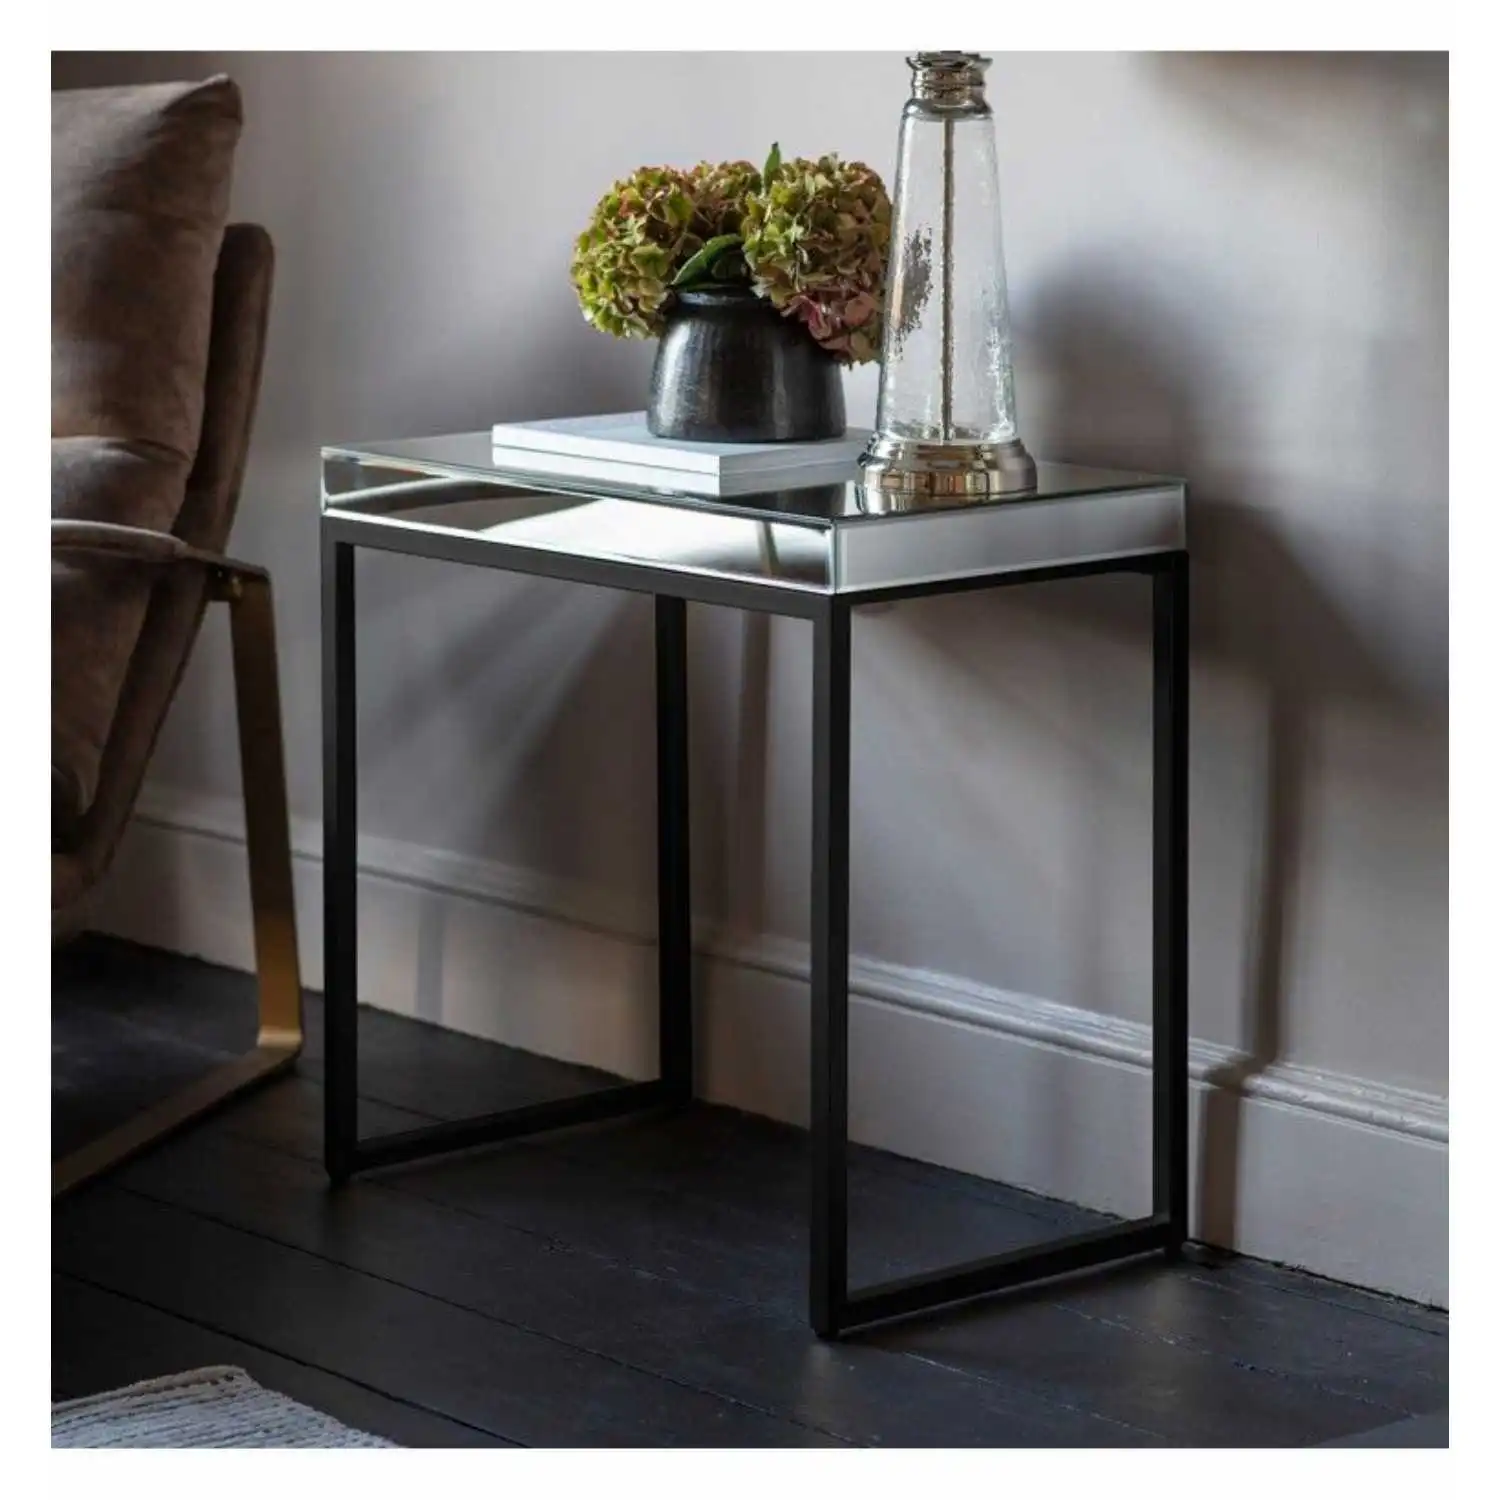 Mirrored Glass Side Table Black Metal Frame